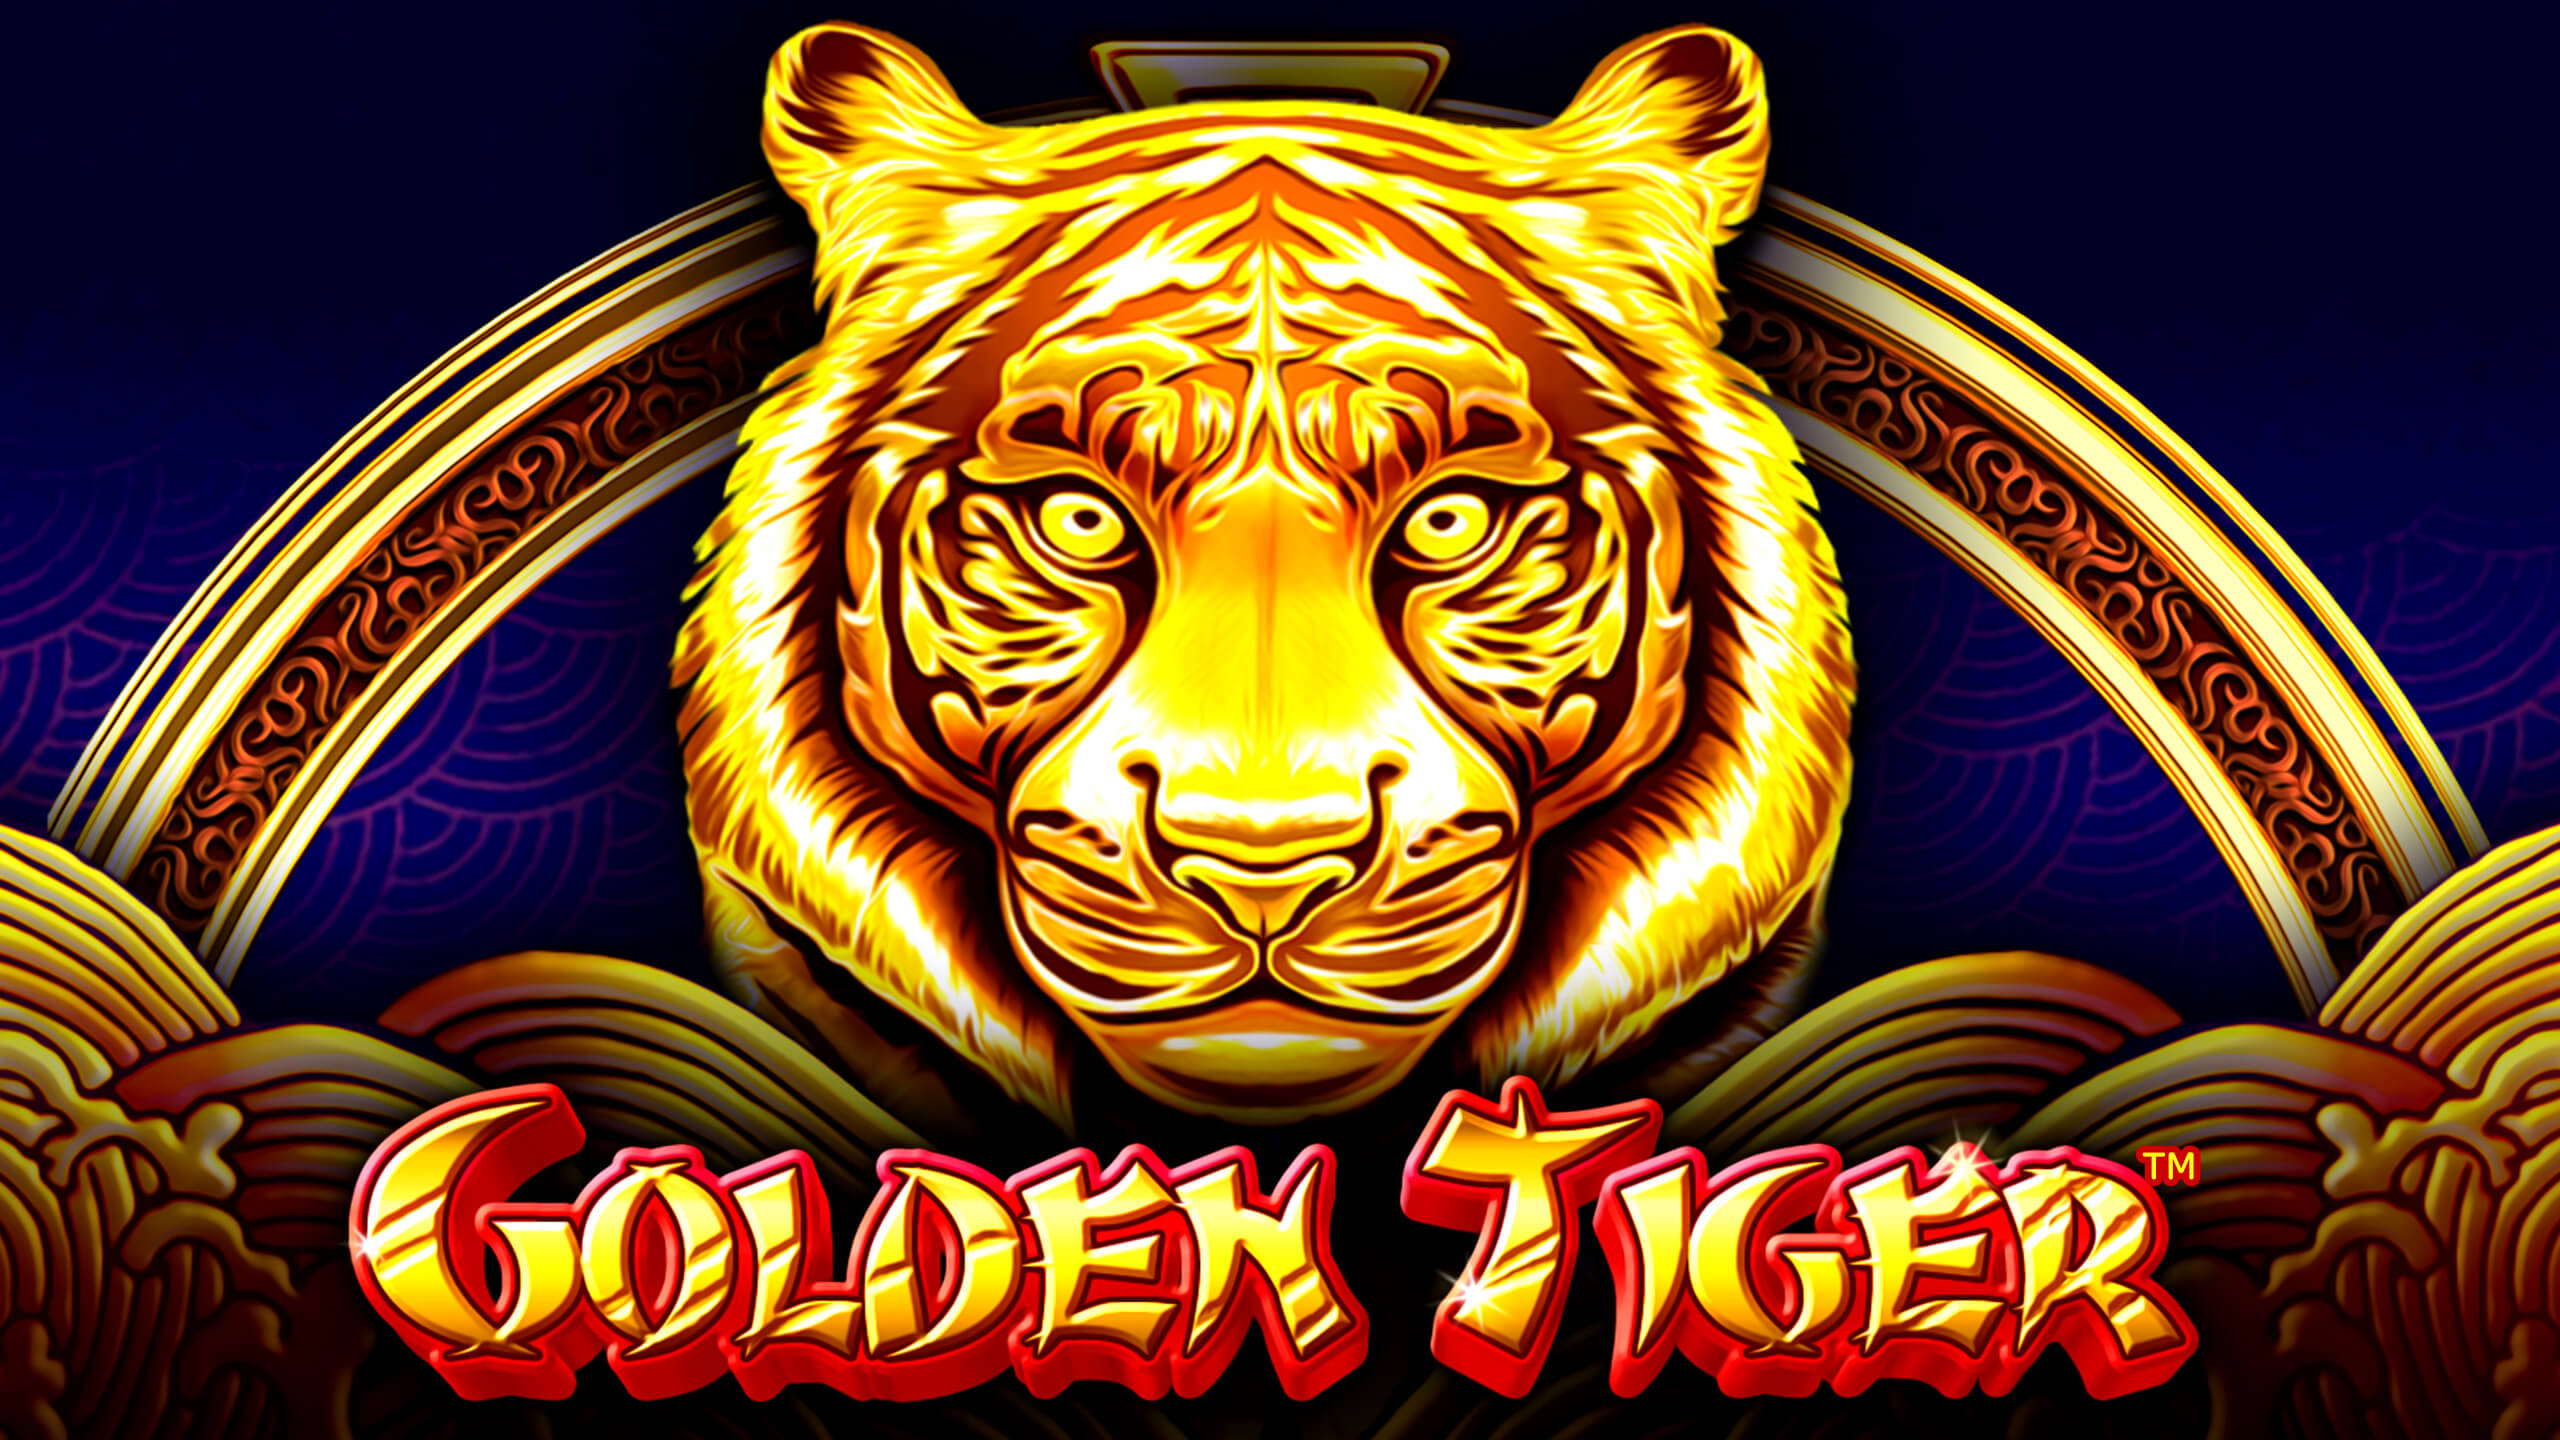 Golden Tiger Slot Machine Online for Free - Play iSoftBet game